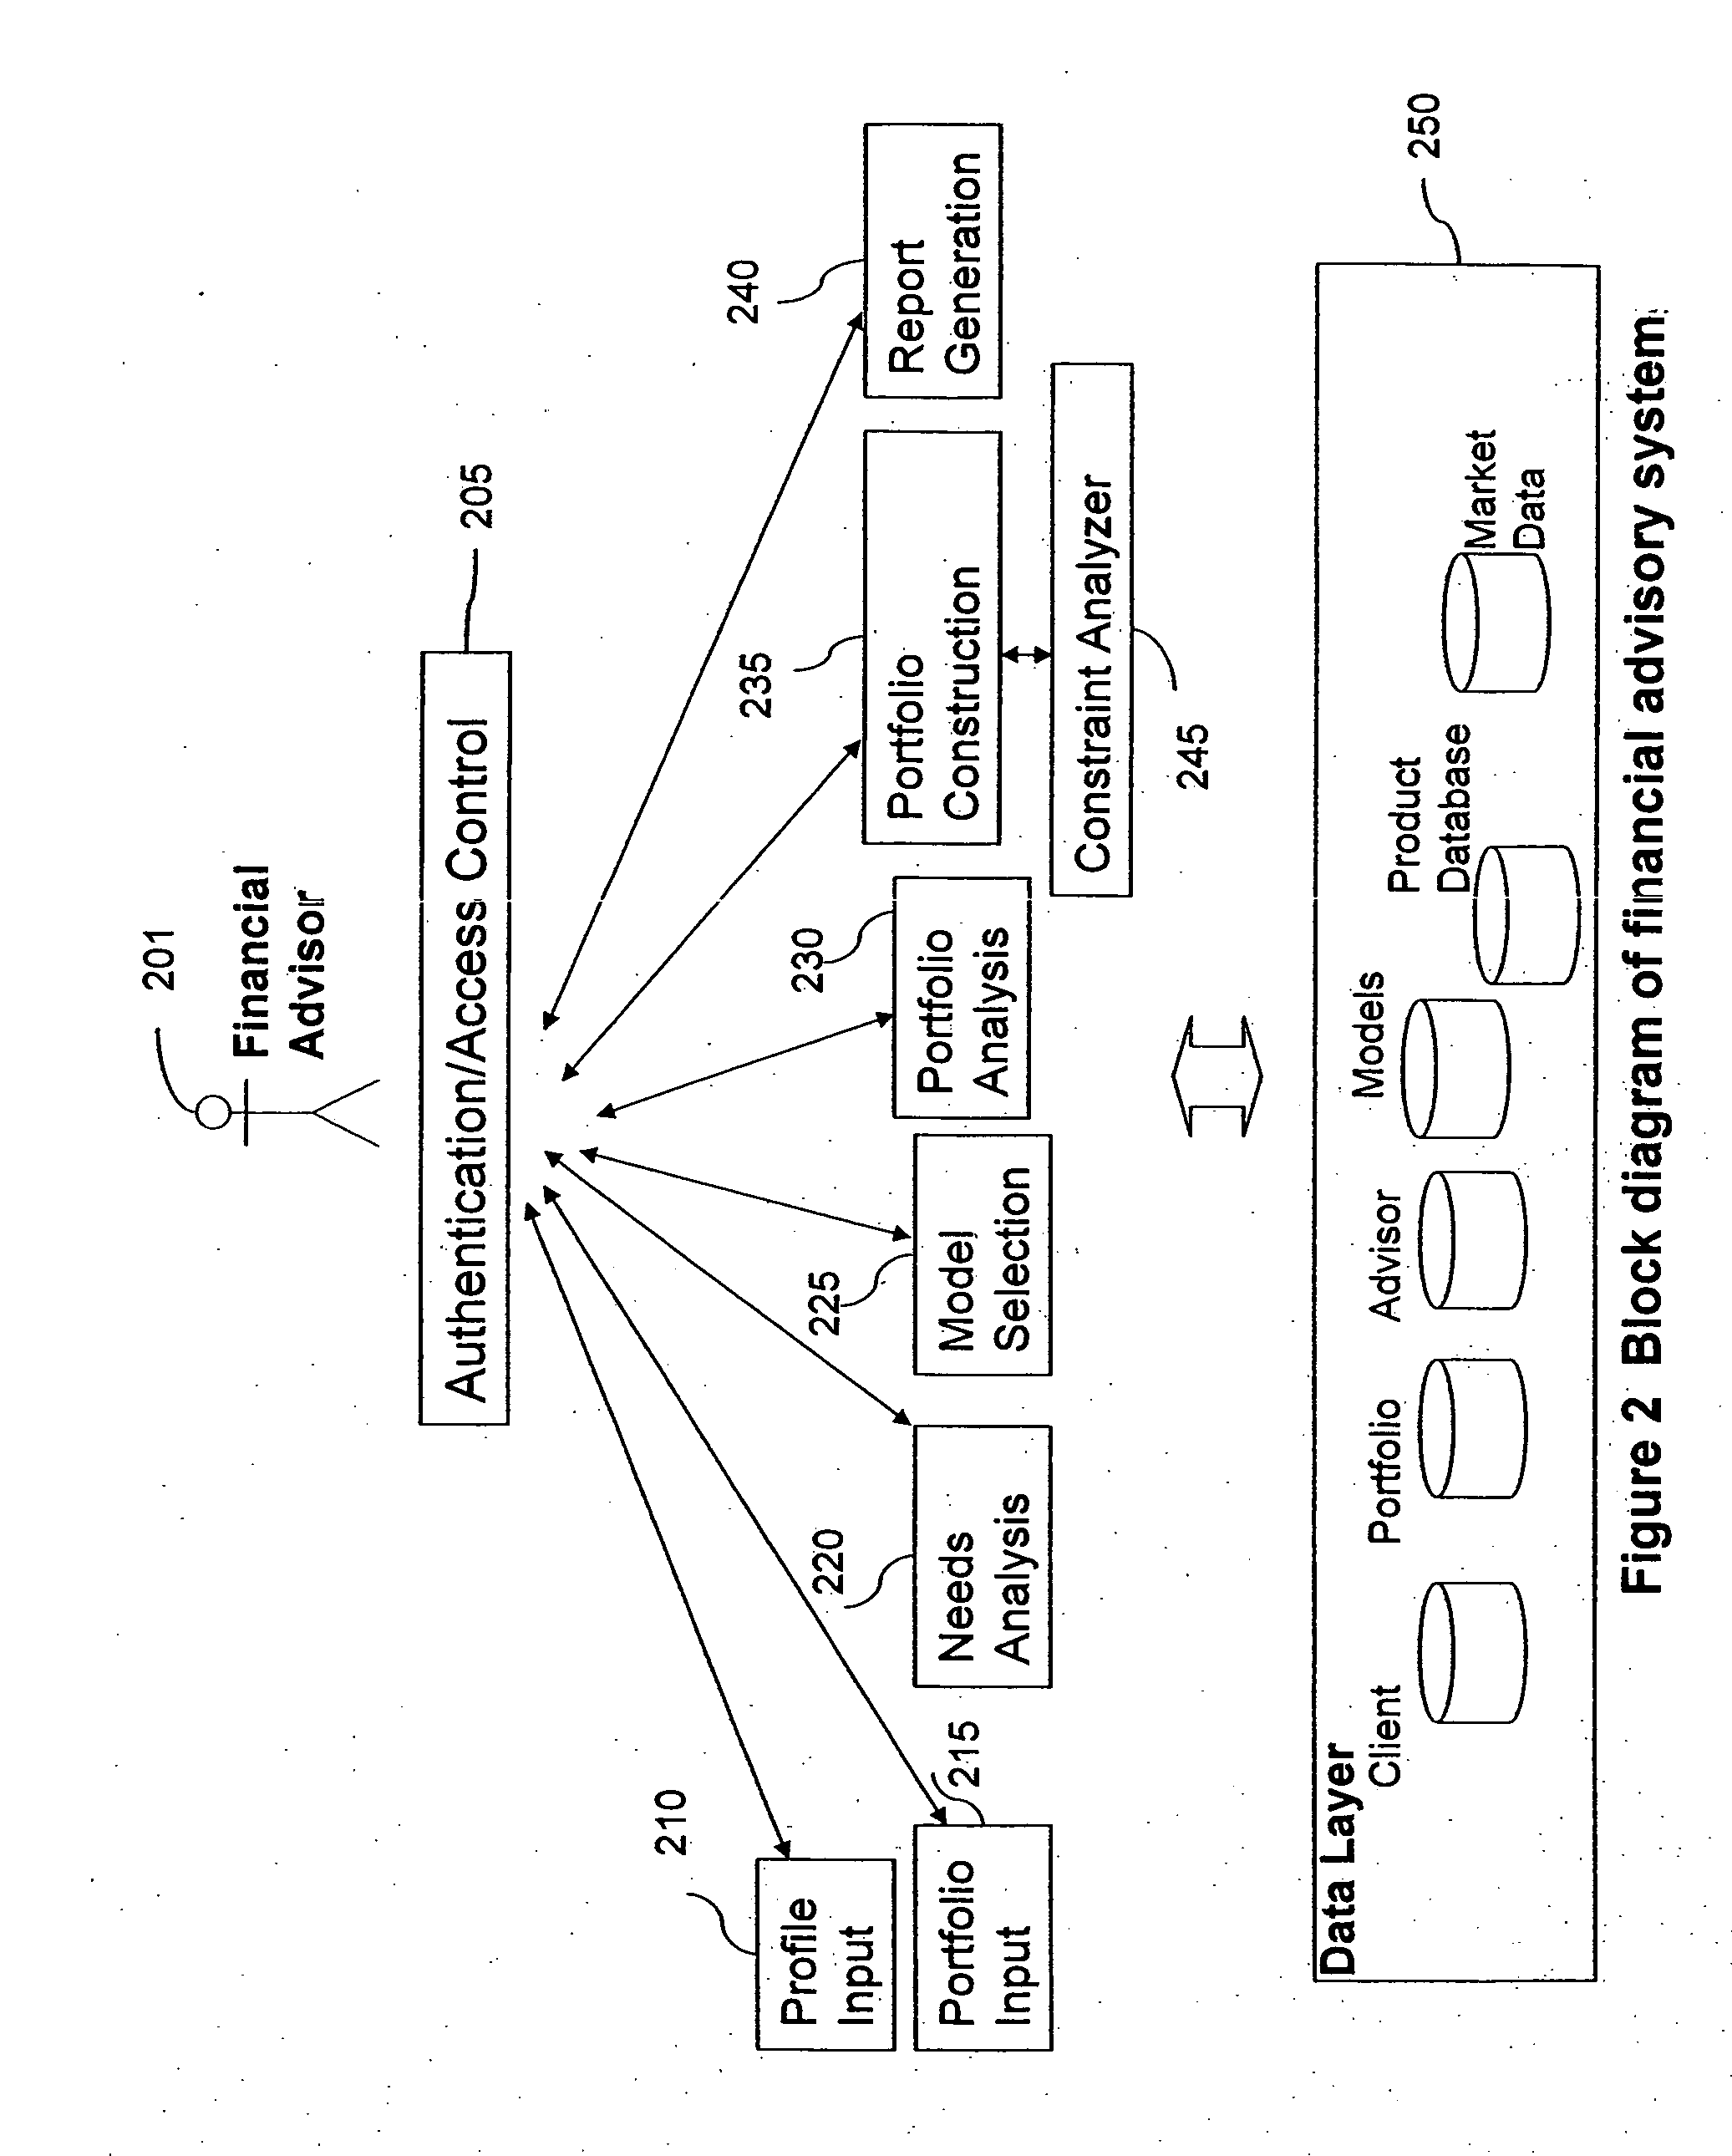 Systems and methods for real-time, dynamic multi-dimensional constraint analysis of portfolios of financial instruments